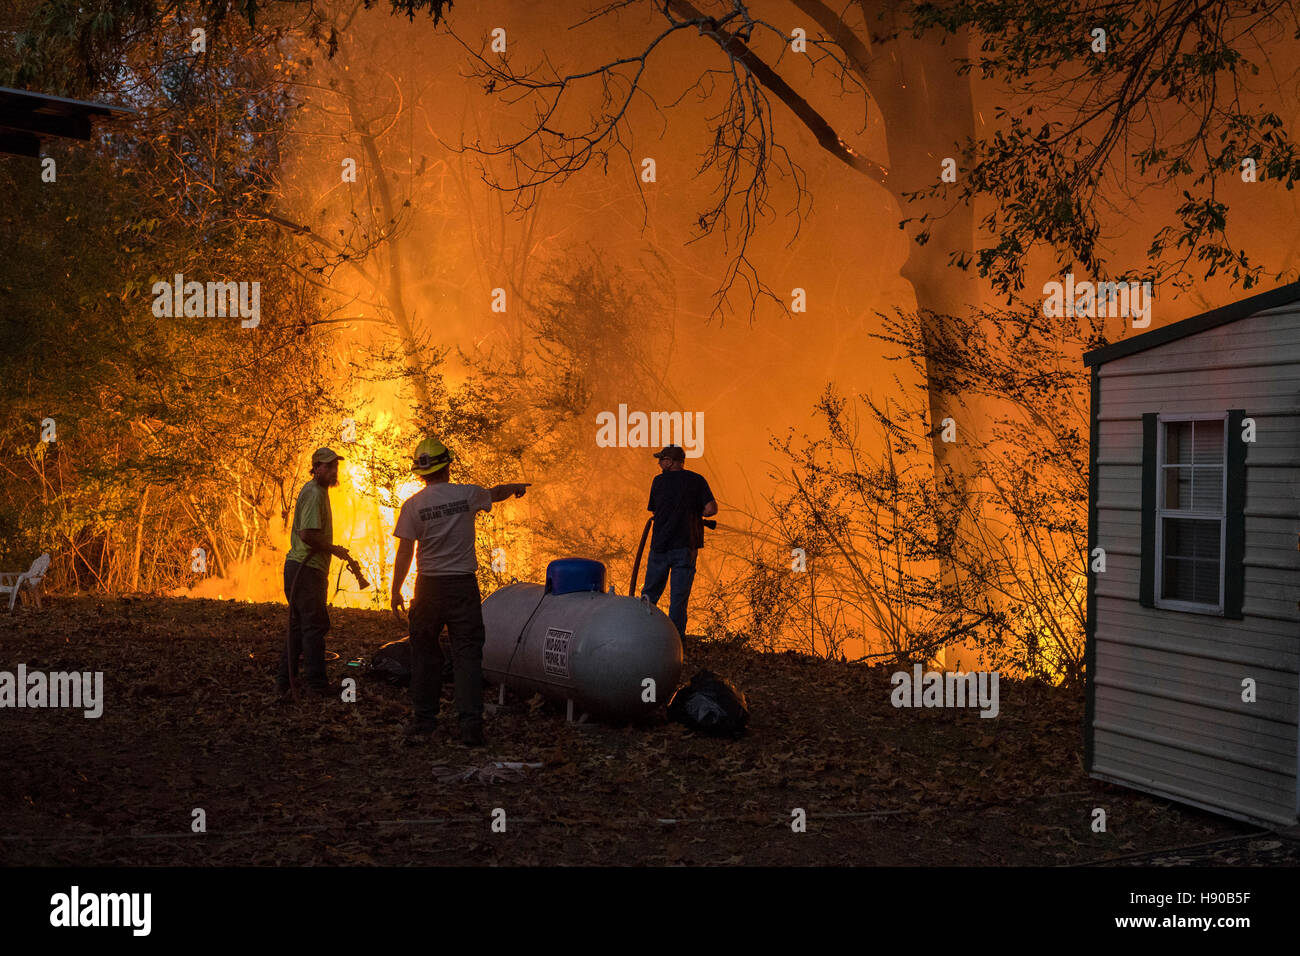 Vernon, USA. 17th Nov, 2016. A debris fire that got out of control Thursday evening, Nov. 17th, brought volunteer firefighters from Vernon and Crossville, Al. out to fight it. The worst drought in recent history has the Alabama woods tinder dry. Credit:  Tim Thompson/Alamy Live News Stock Photo